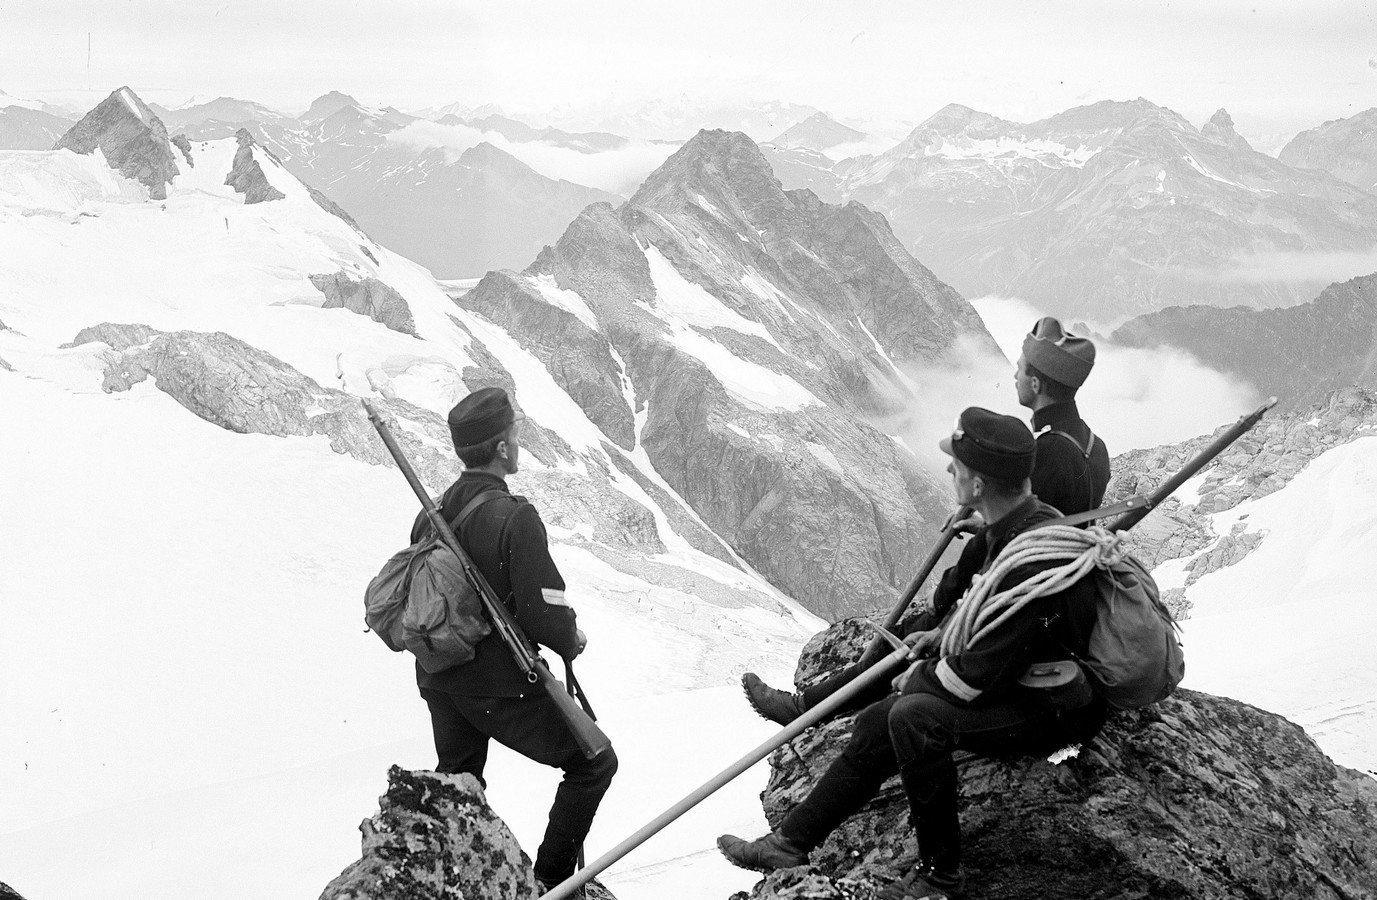 People 1377x900 old photos monochrome history photography Switzerland Italy border Alps mountains rocks winter snow soldier mist World War I weapon uniform backpacks ropes climbing men vintage landscape nature